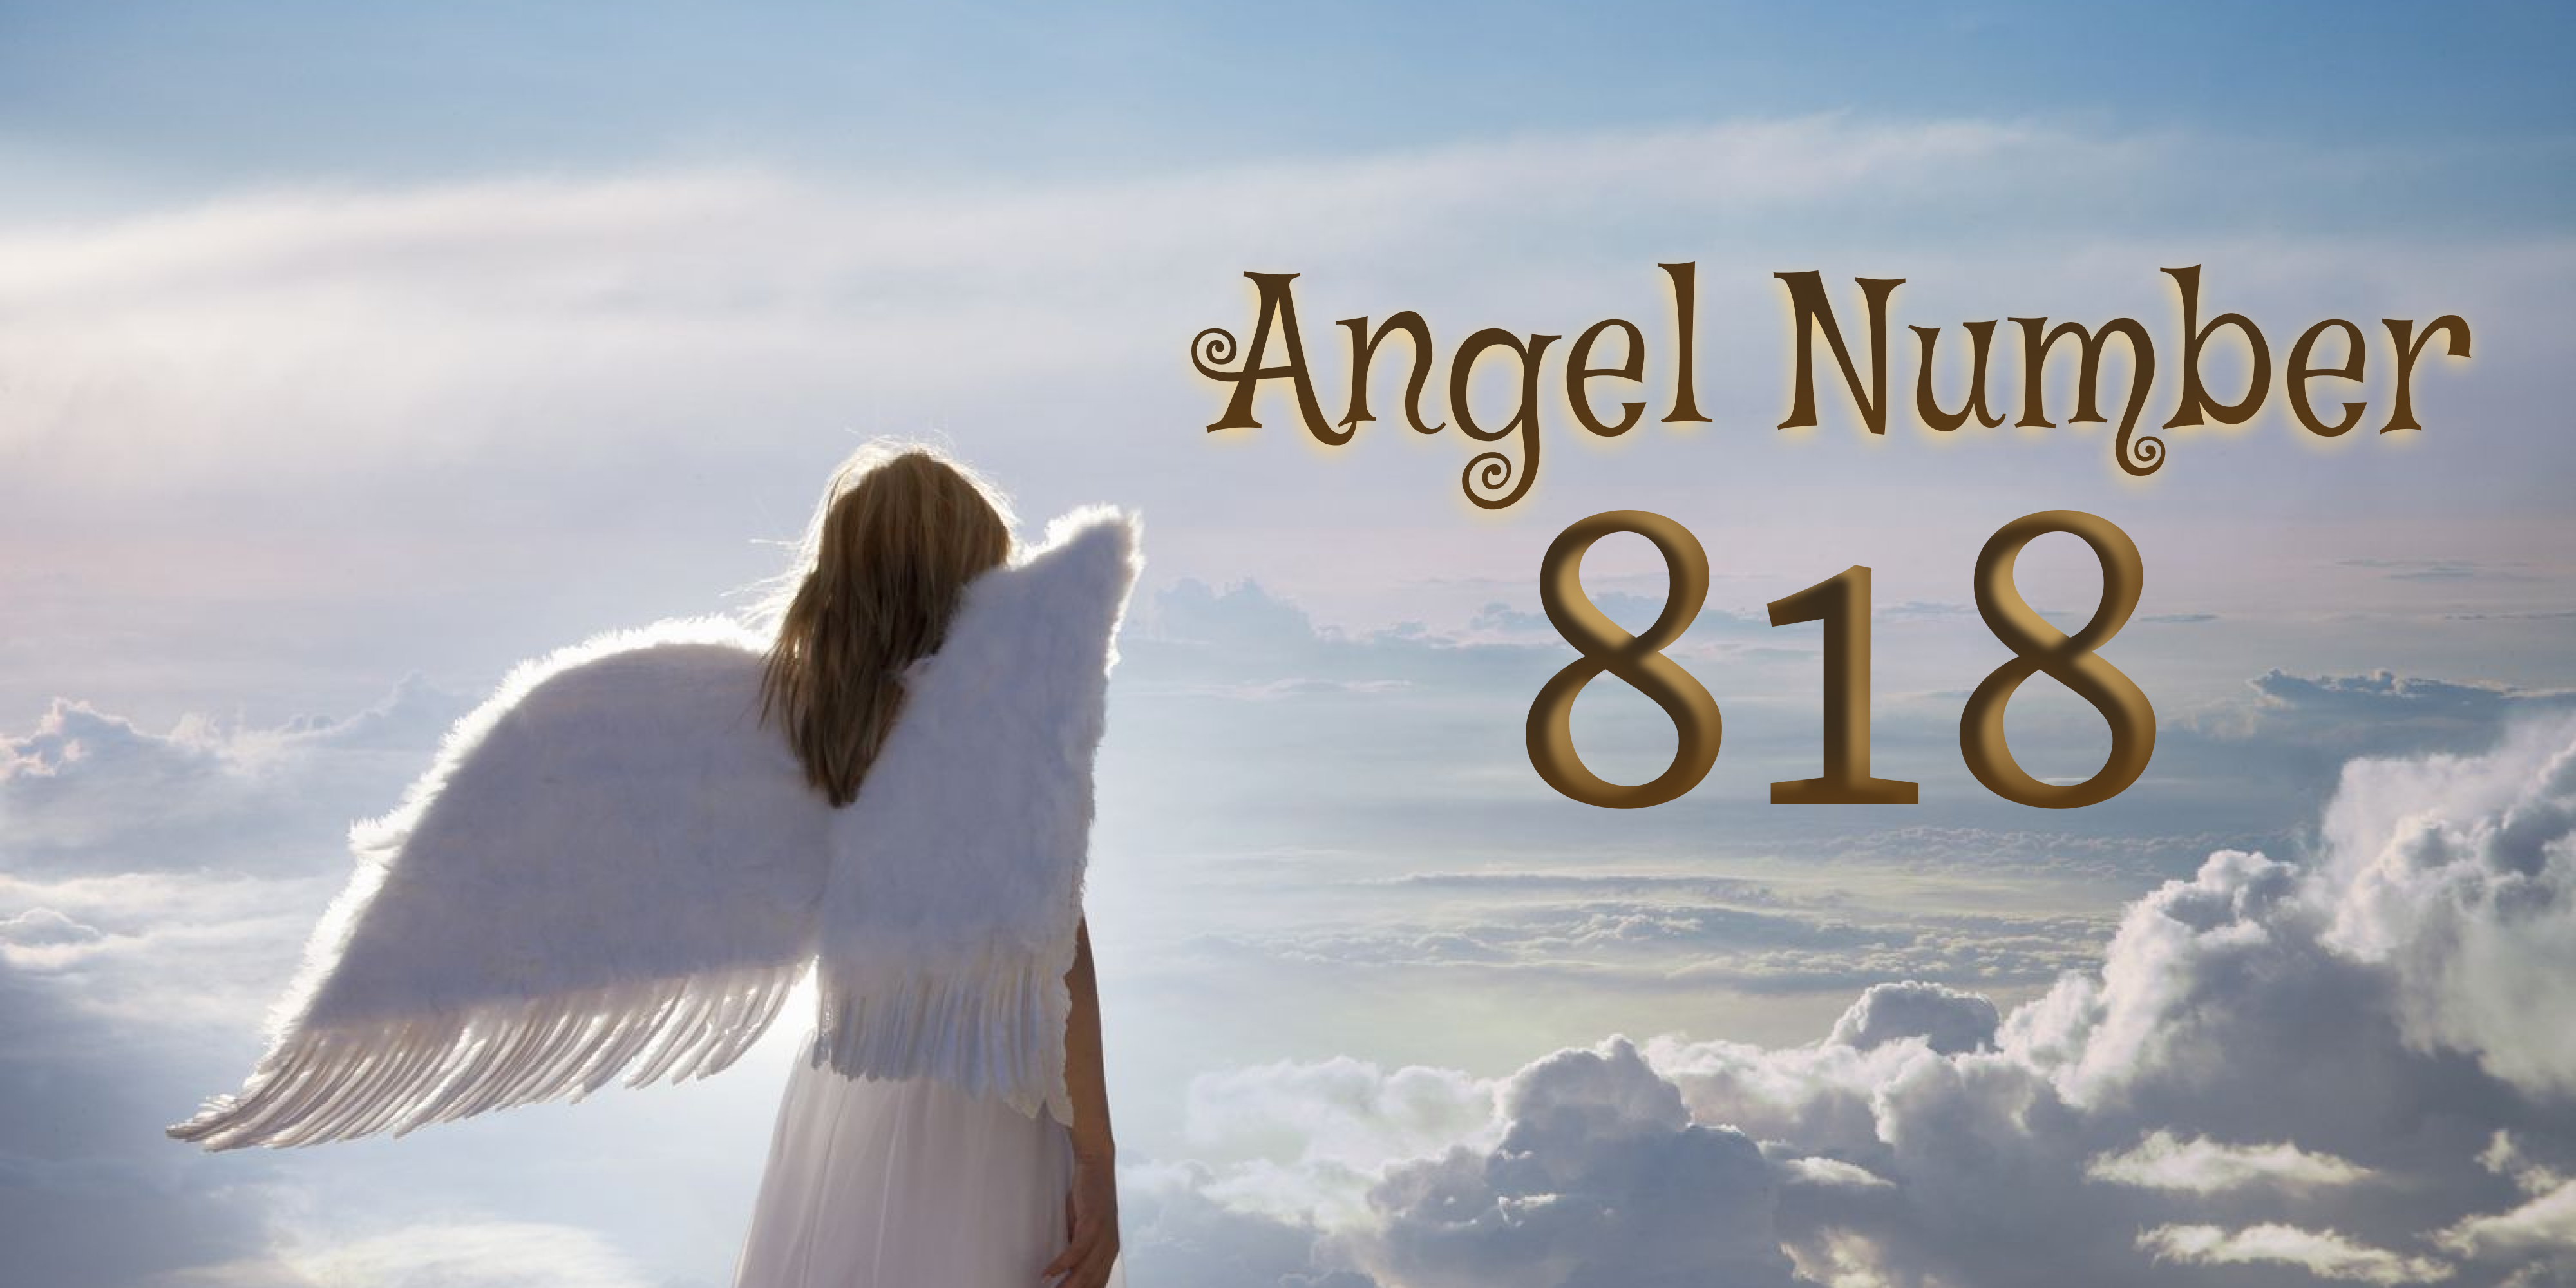 angel number 818 meaning